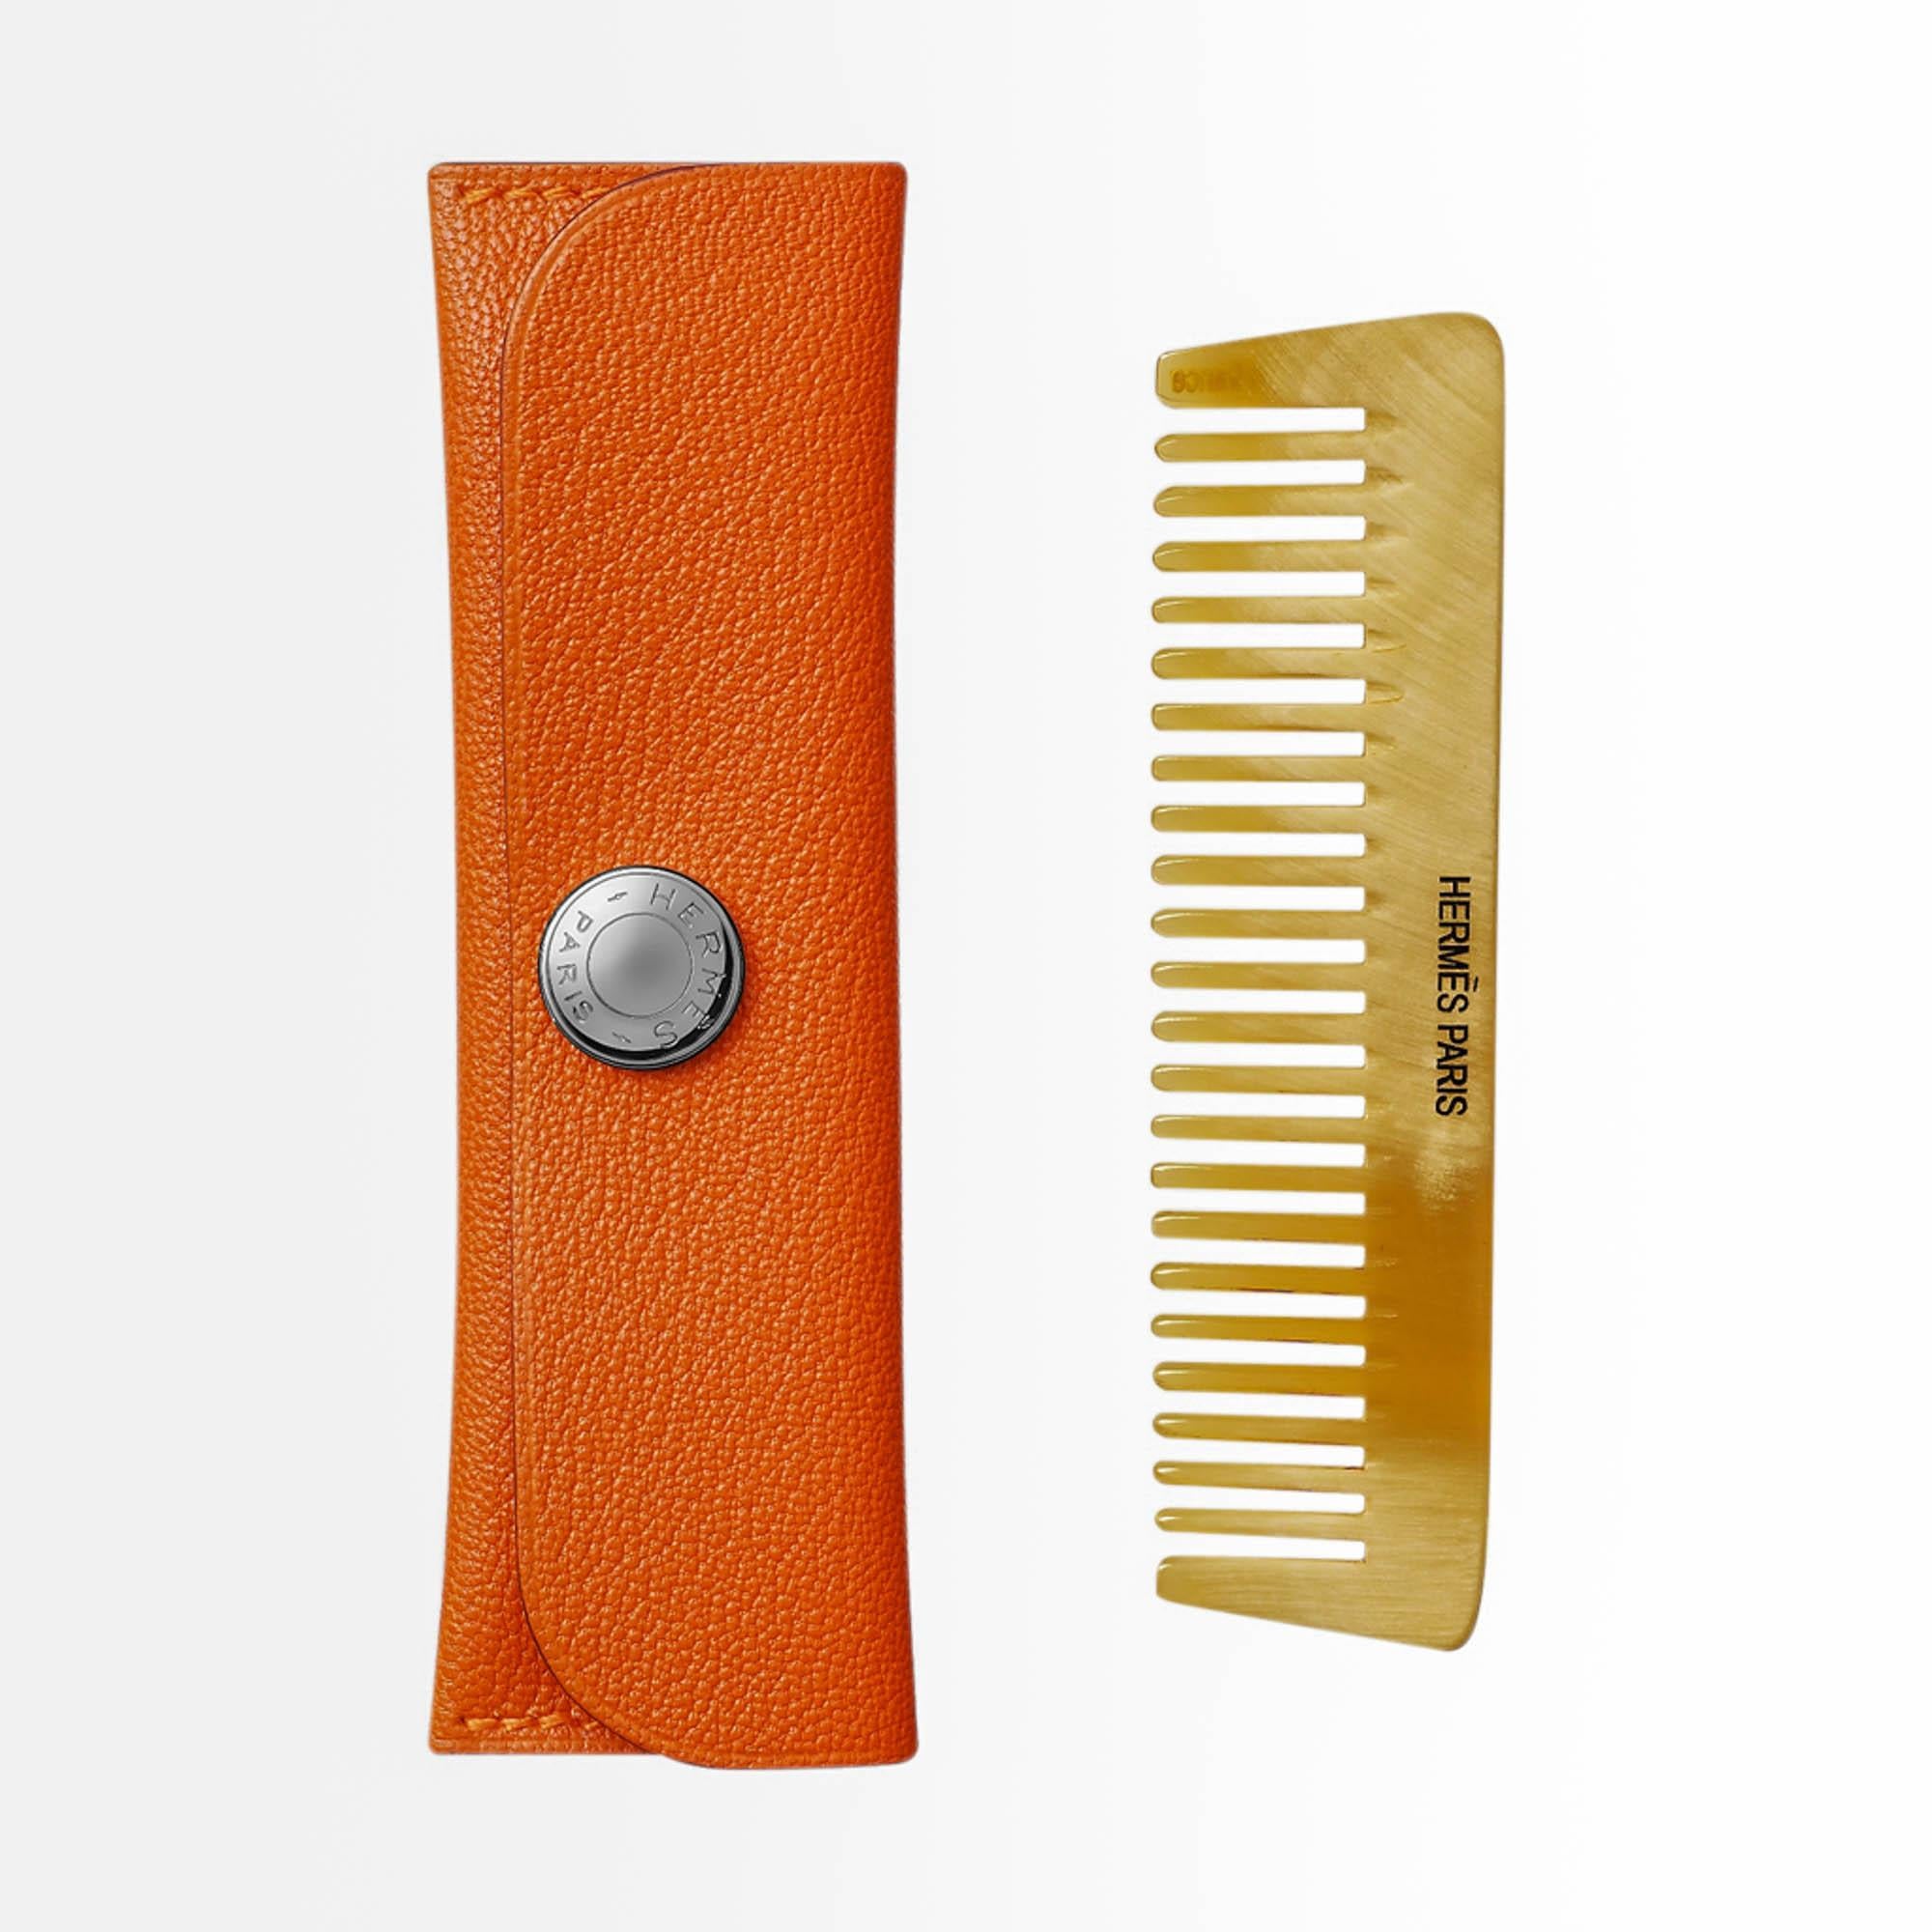 Hermes small comb featured in Horn with Hermes Paris engraving.
Hermes Orange Swift leather case has Clou de Selle snap.
Perfect size to fit any size bag, a pocket - perfect to be coiffed on the go!
New or Store Fresh Condition.
final sale

CASE